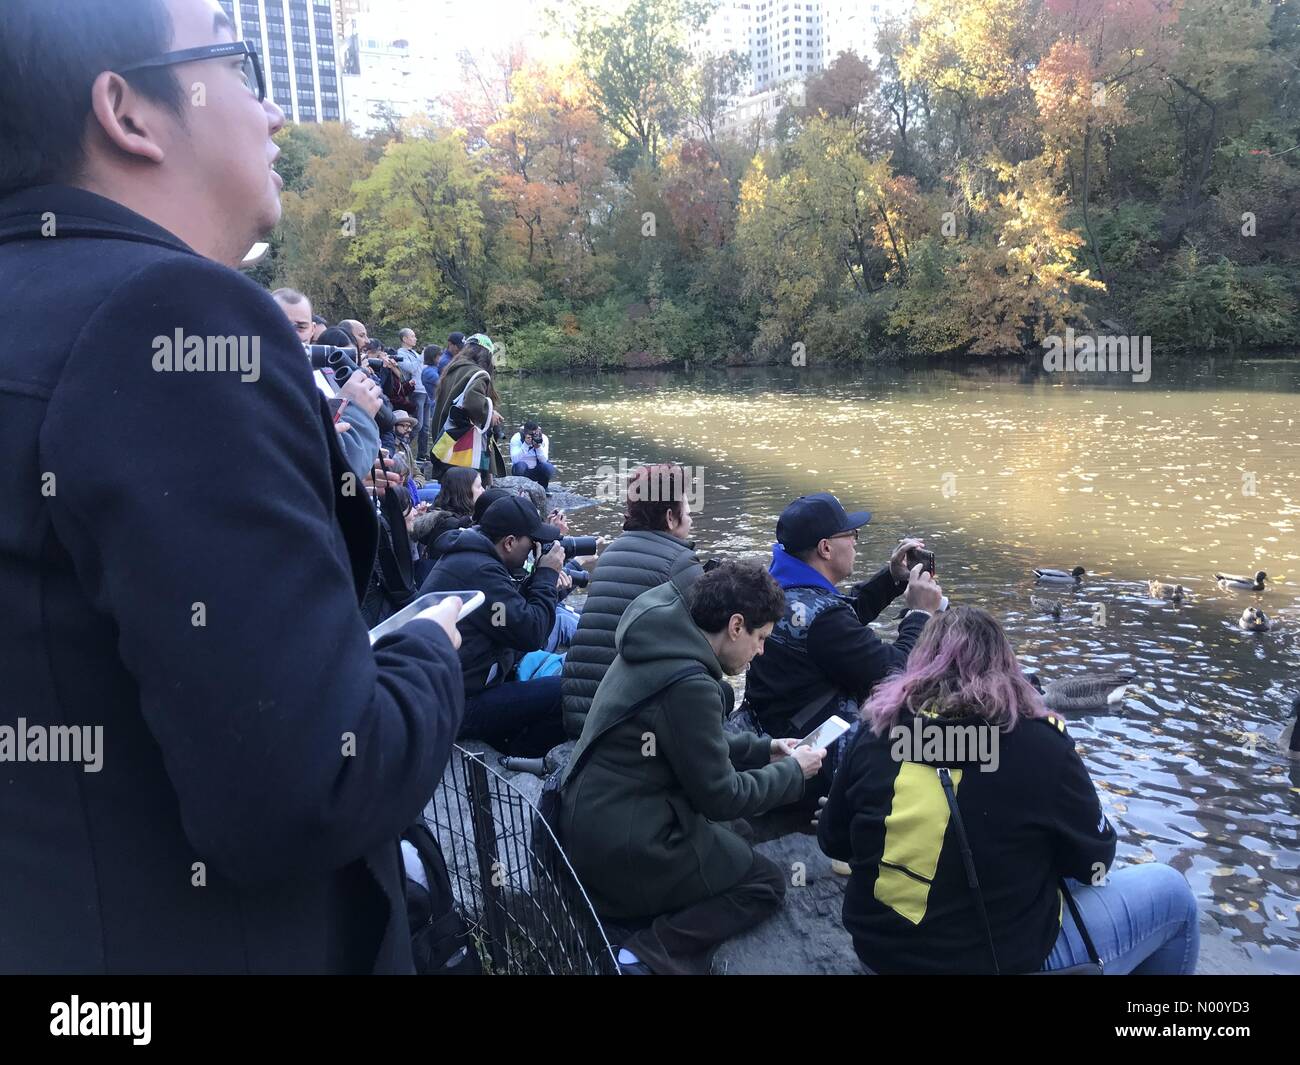 New York, New York, USA. 4th Nov, 2018. Mobs of people trying to photograph the mandarin duck at Central park pond Credit: Yvonne M. Conde/StockimoNews/Alamy Live News Stock Photo